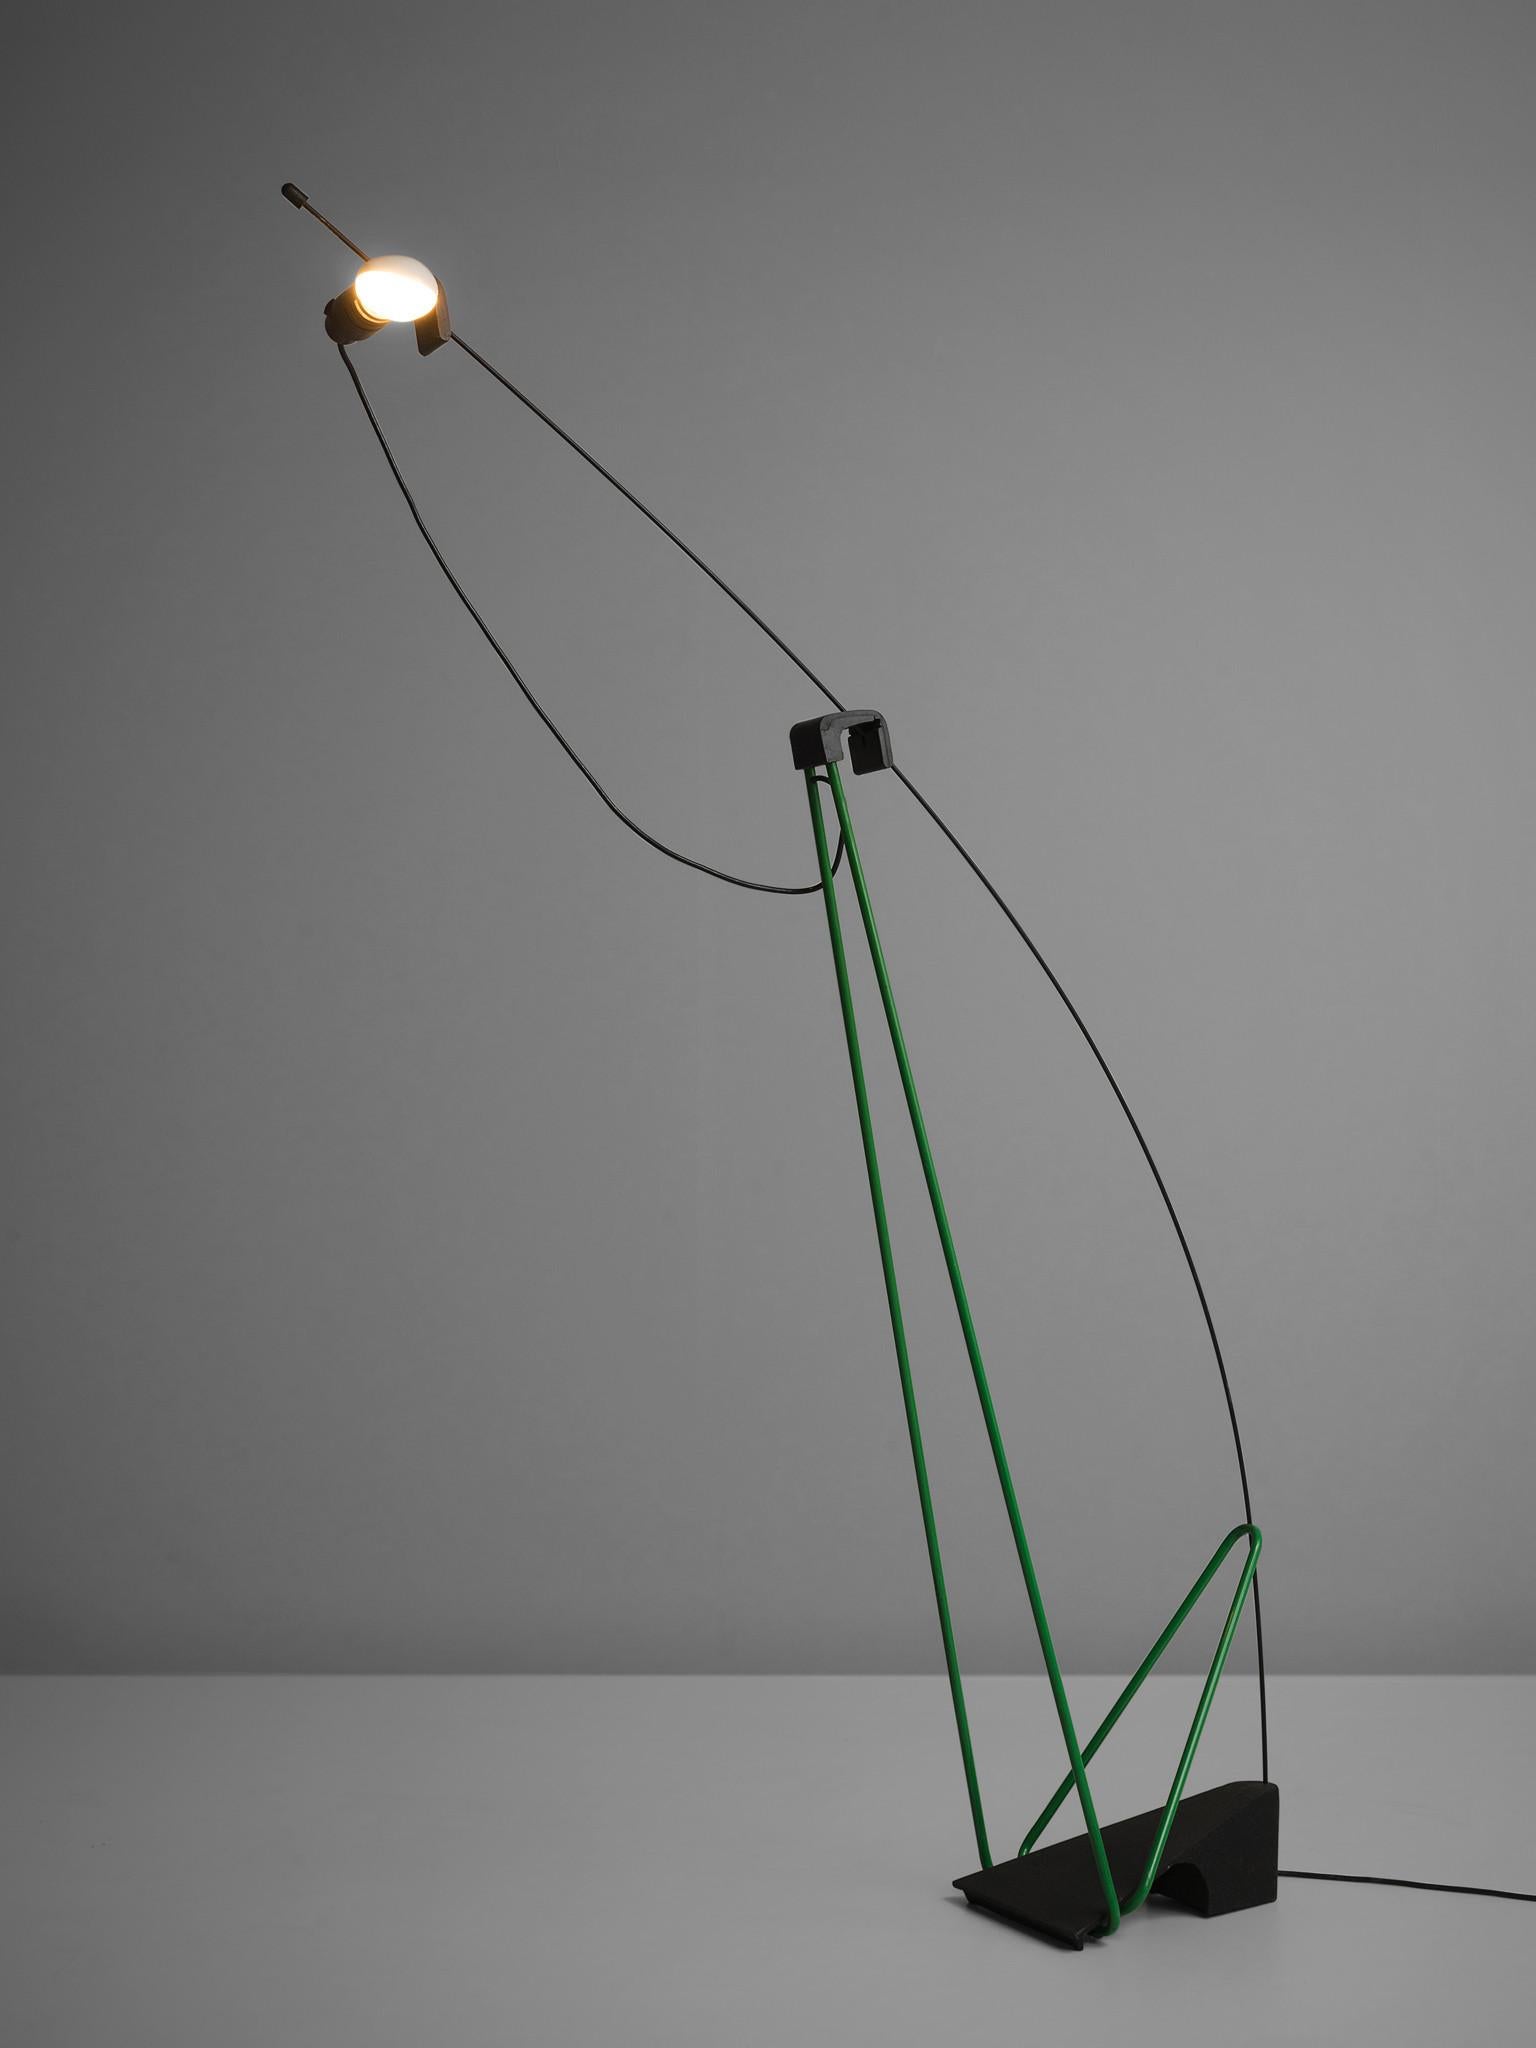 Floor lamp, green and black, polyester and steel, Italy, 1970s.

This playful, graphic floor lamp is designed to be an eyecatcher in every modern interior. The lamp holds a solid steel base and playful black and green lines that go both horizontal